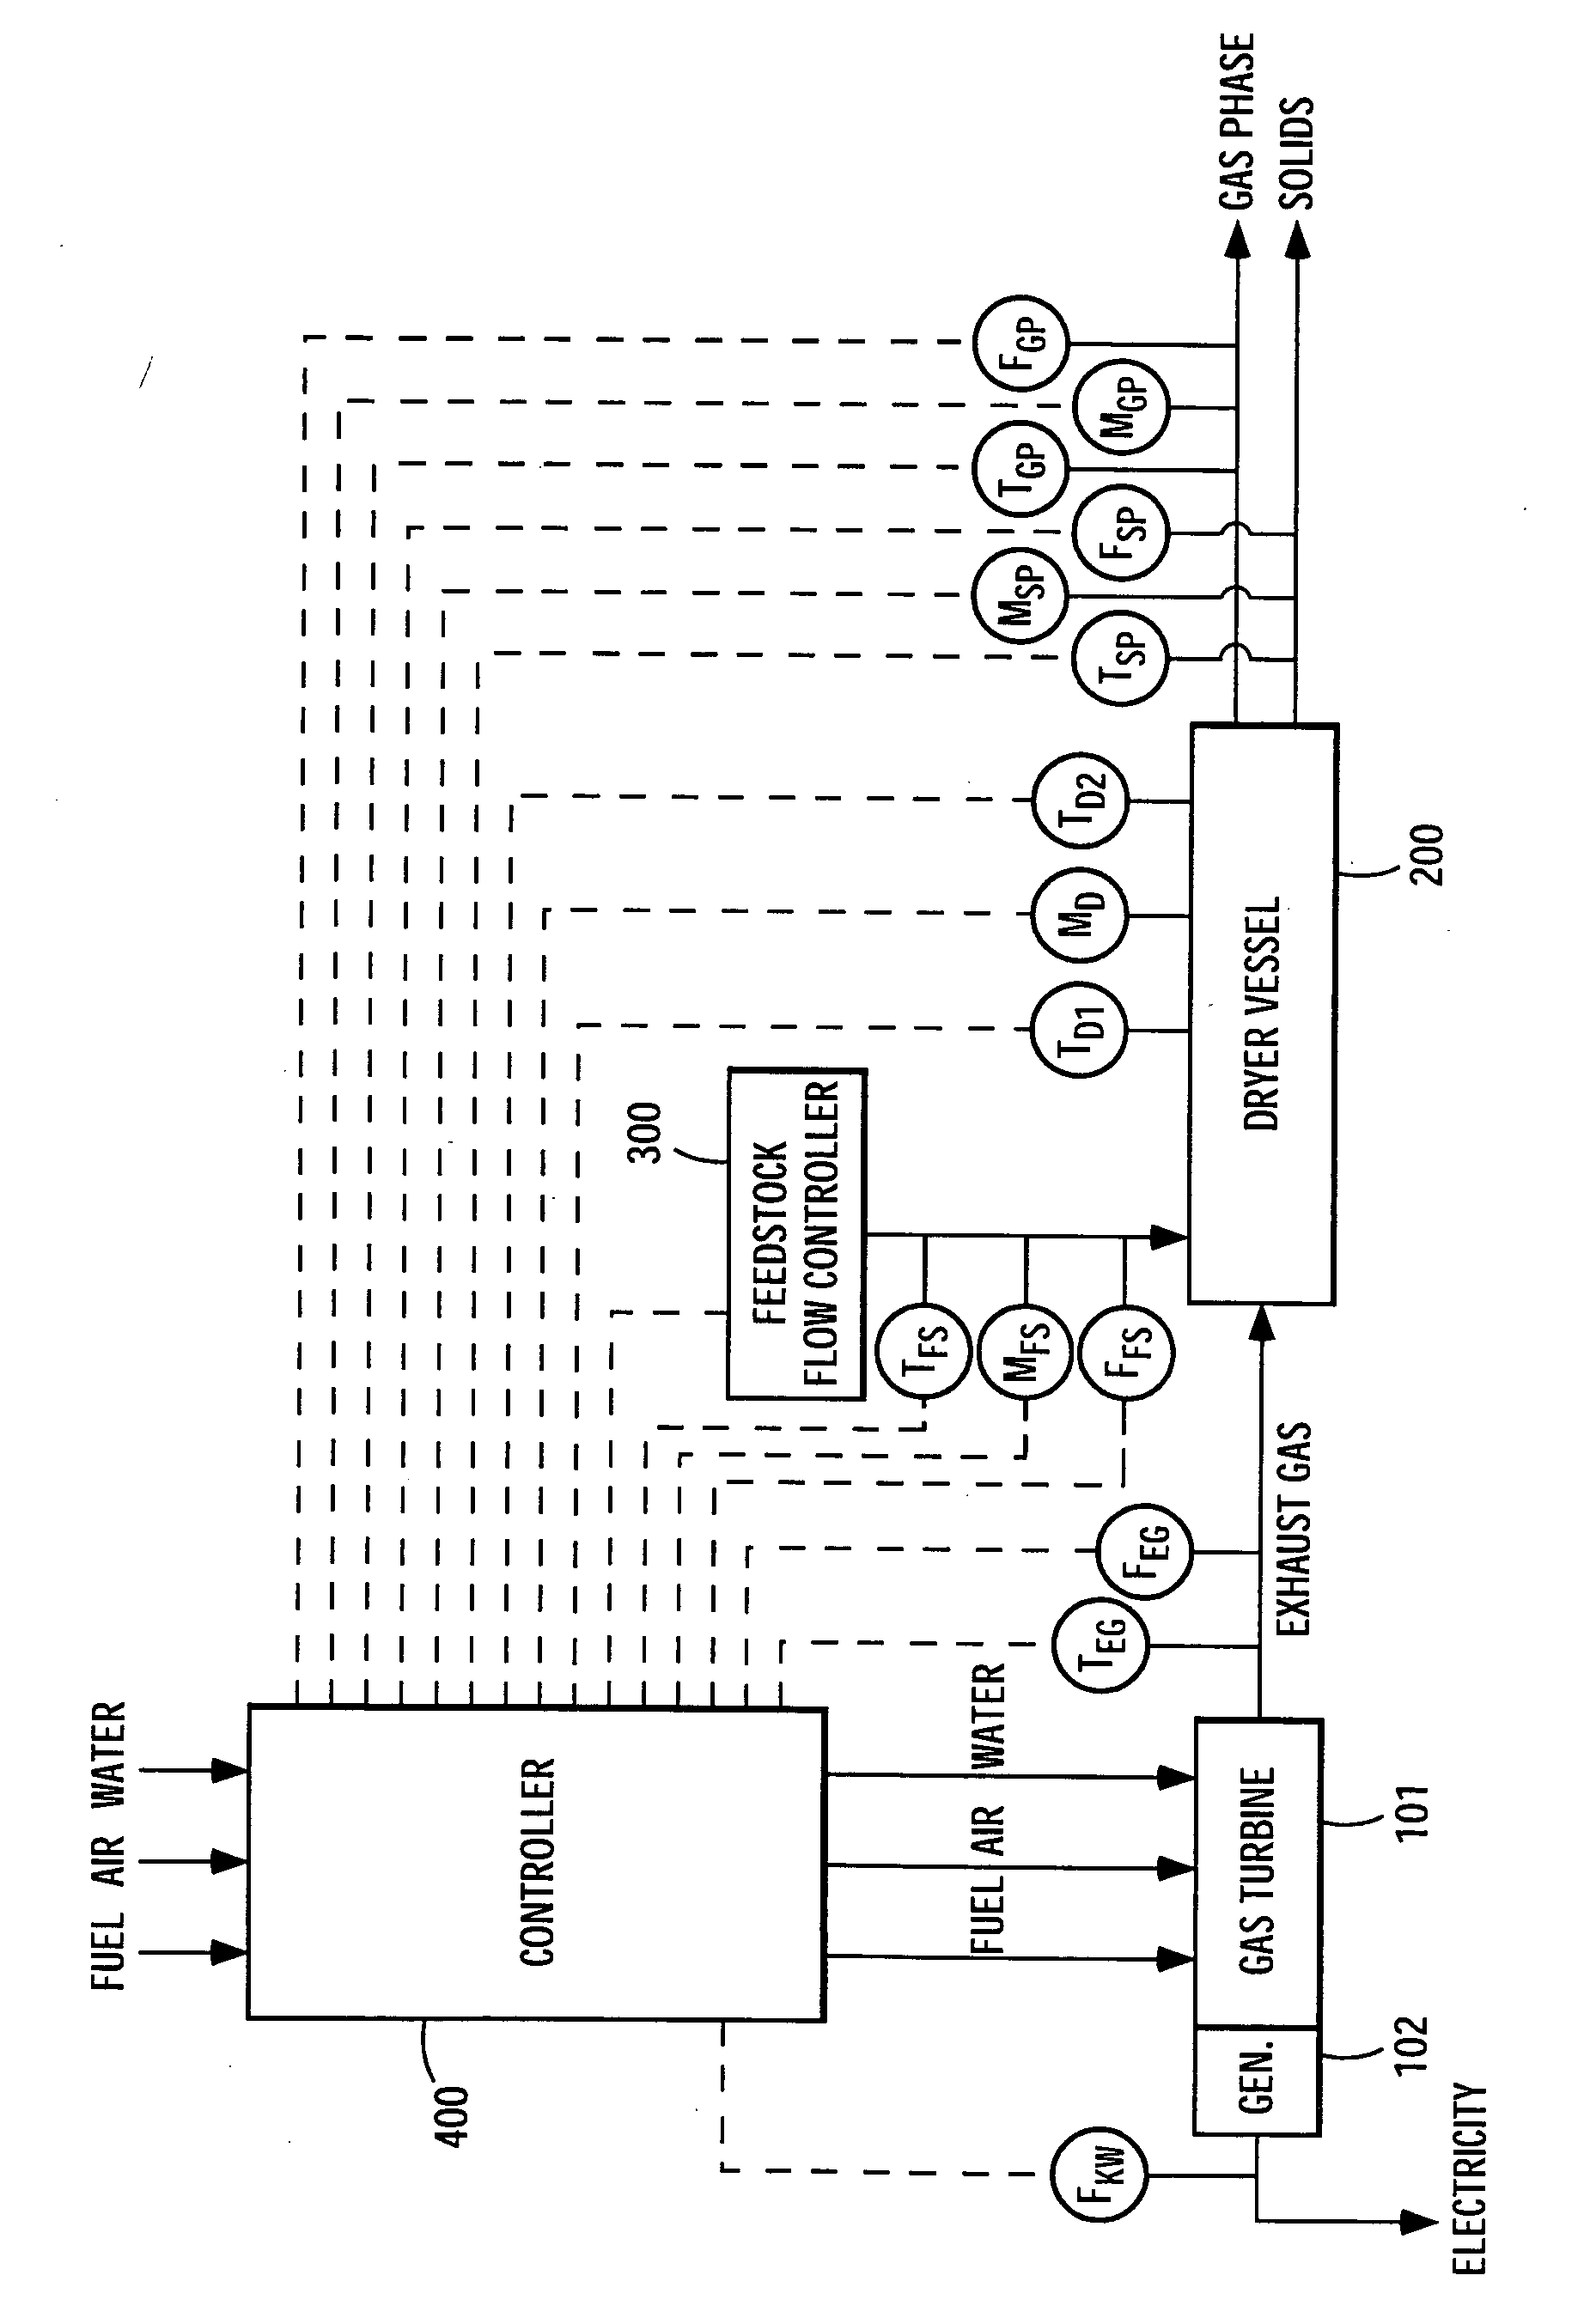 Control system for gas turbine in material treatment unit